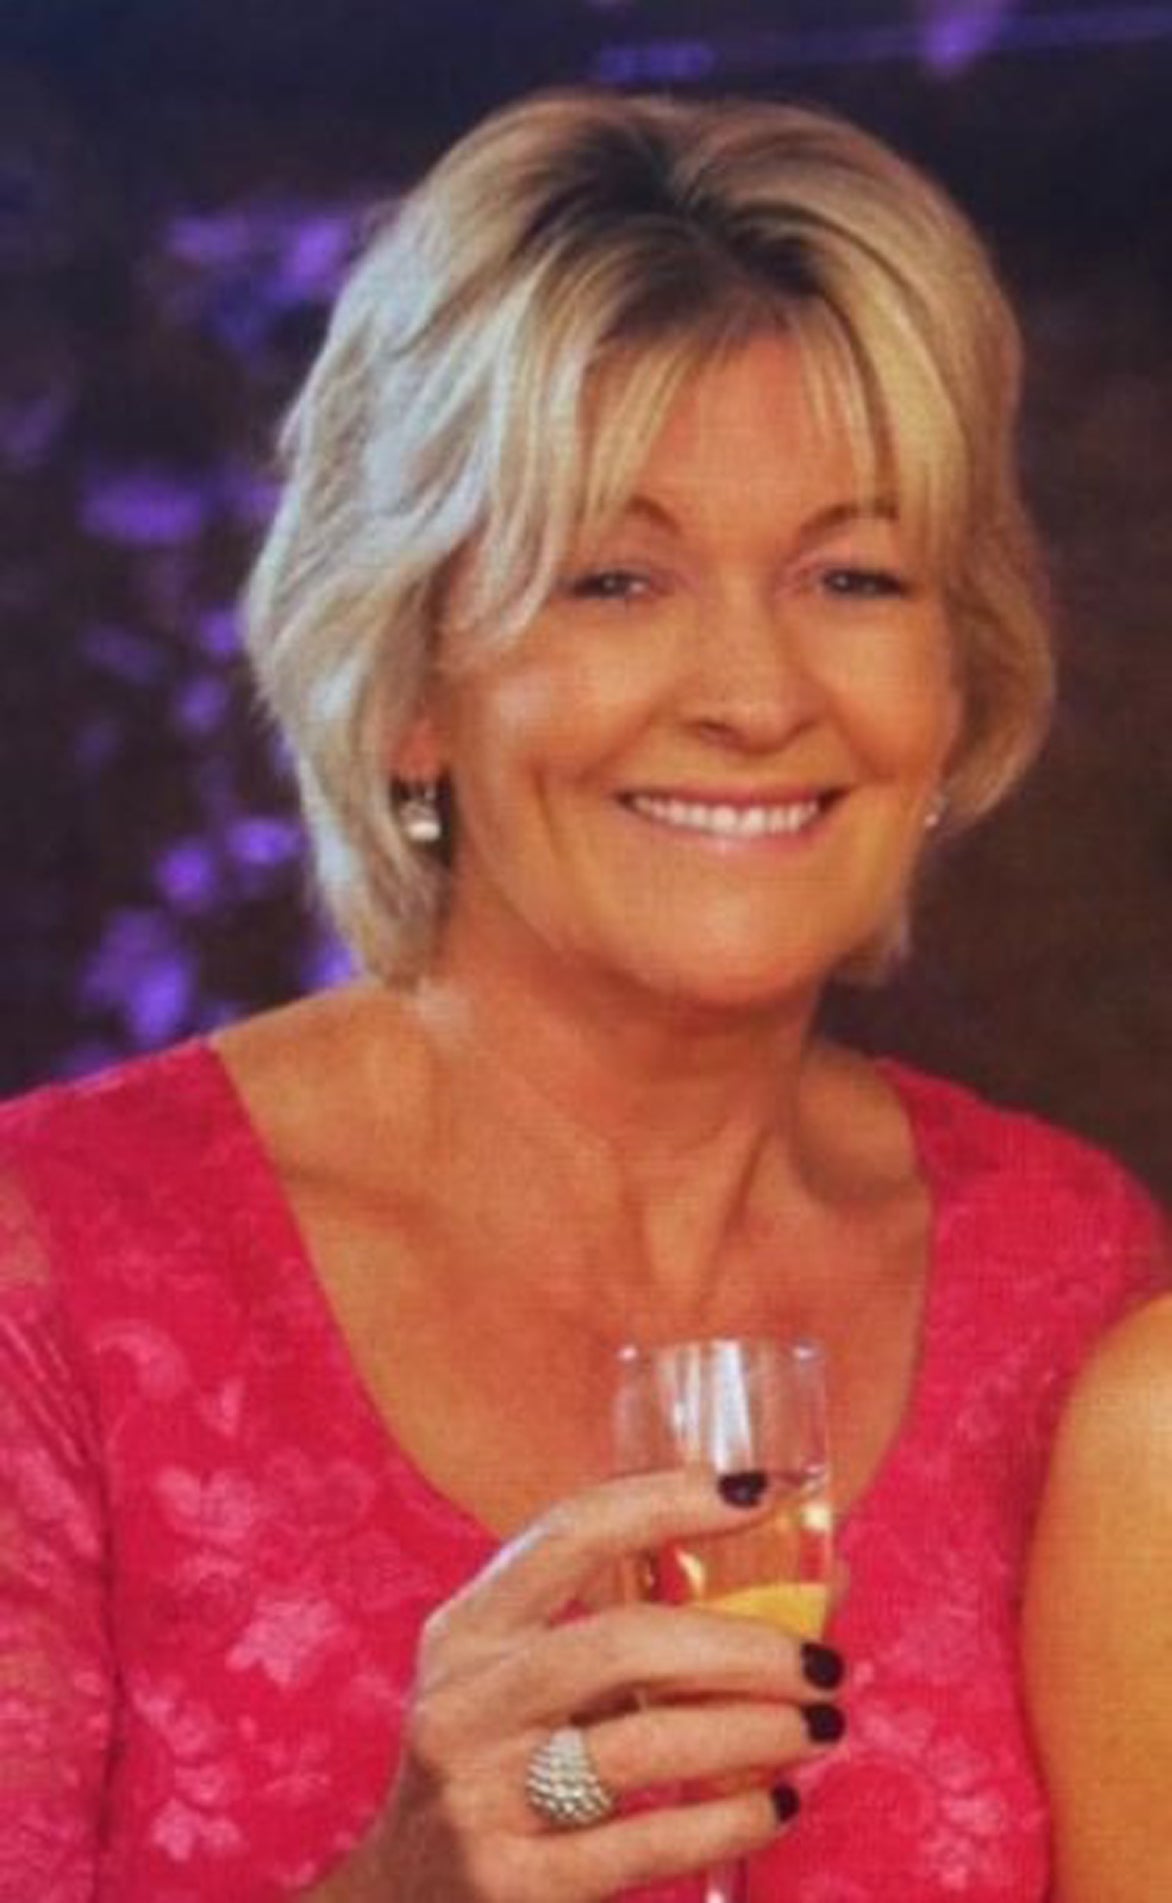 Wendy Taylor was described as “beautiful, kind, funny and caring”